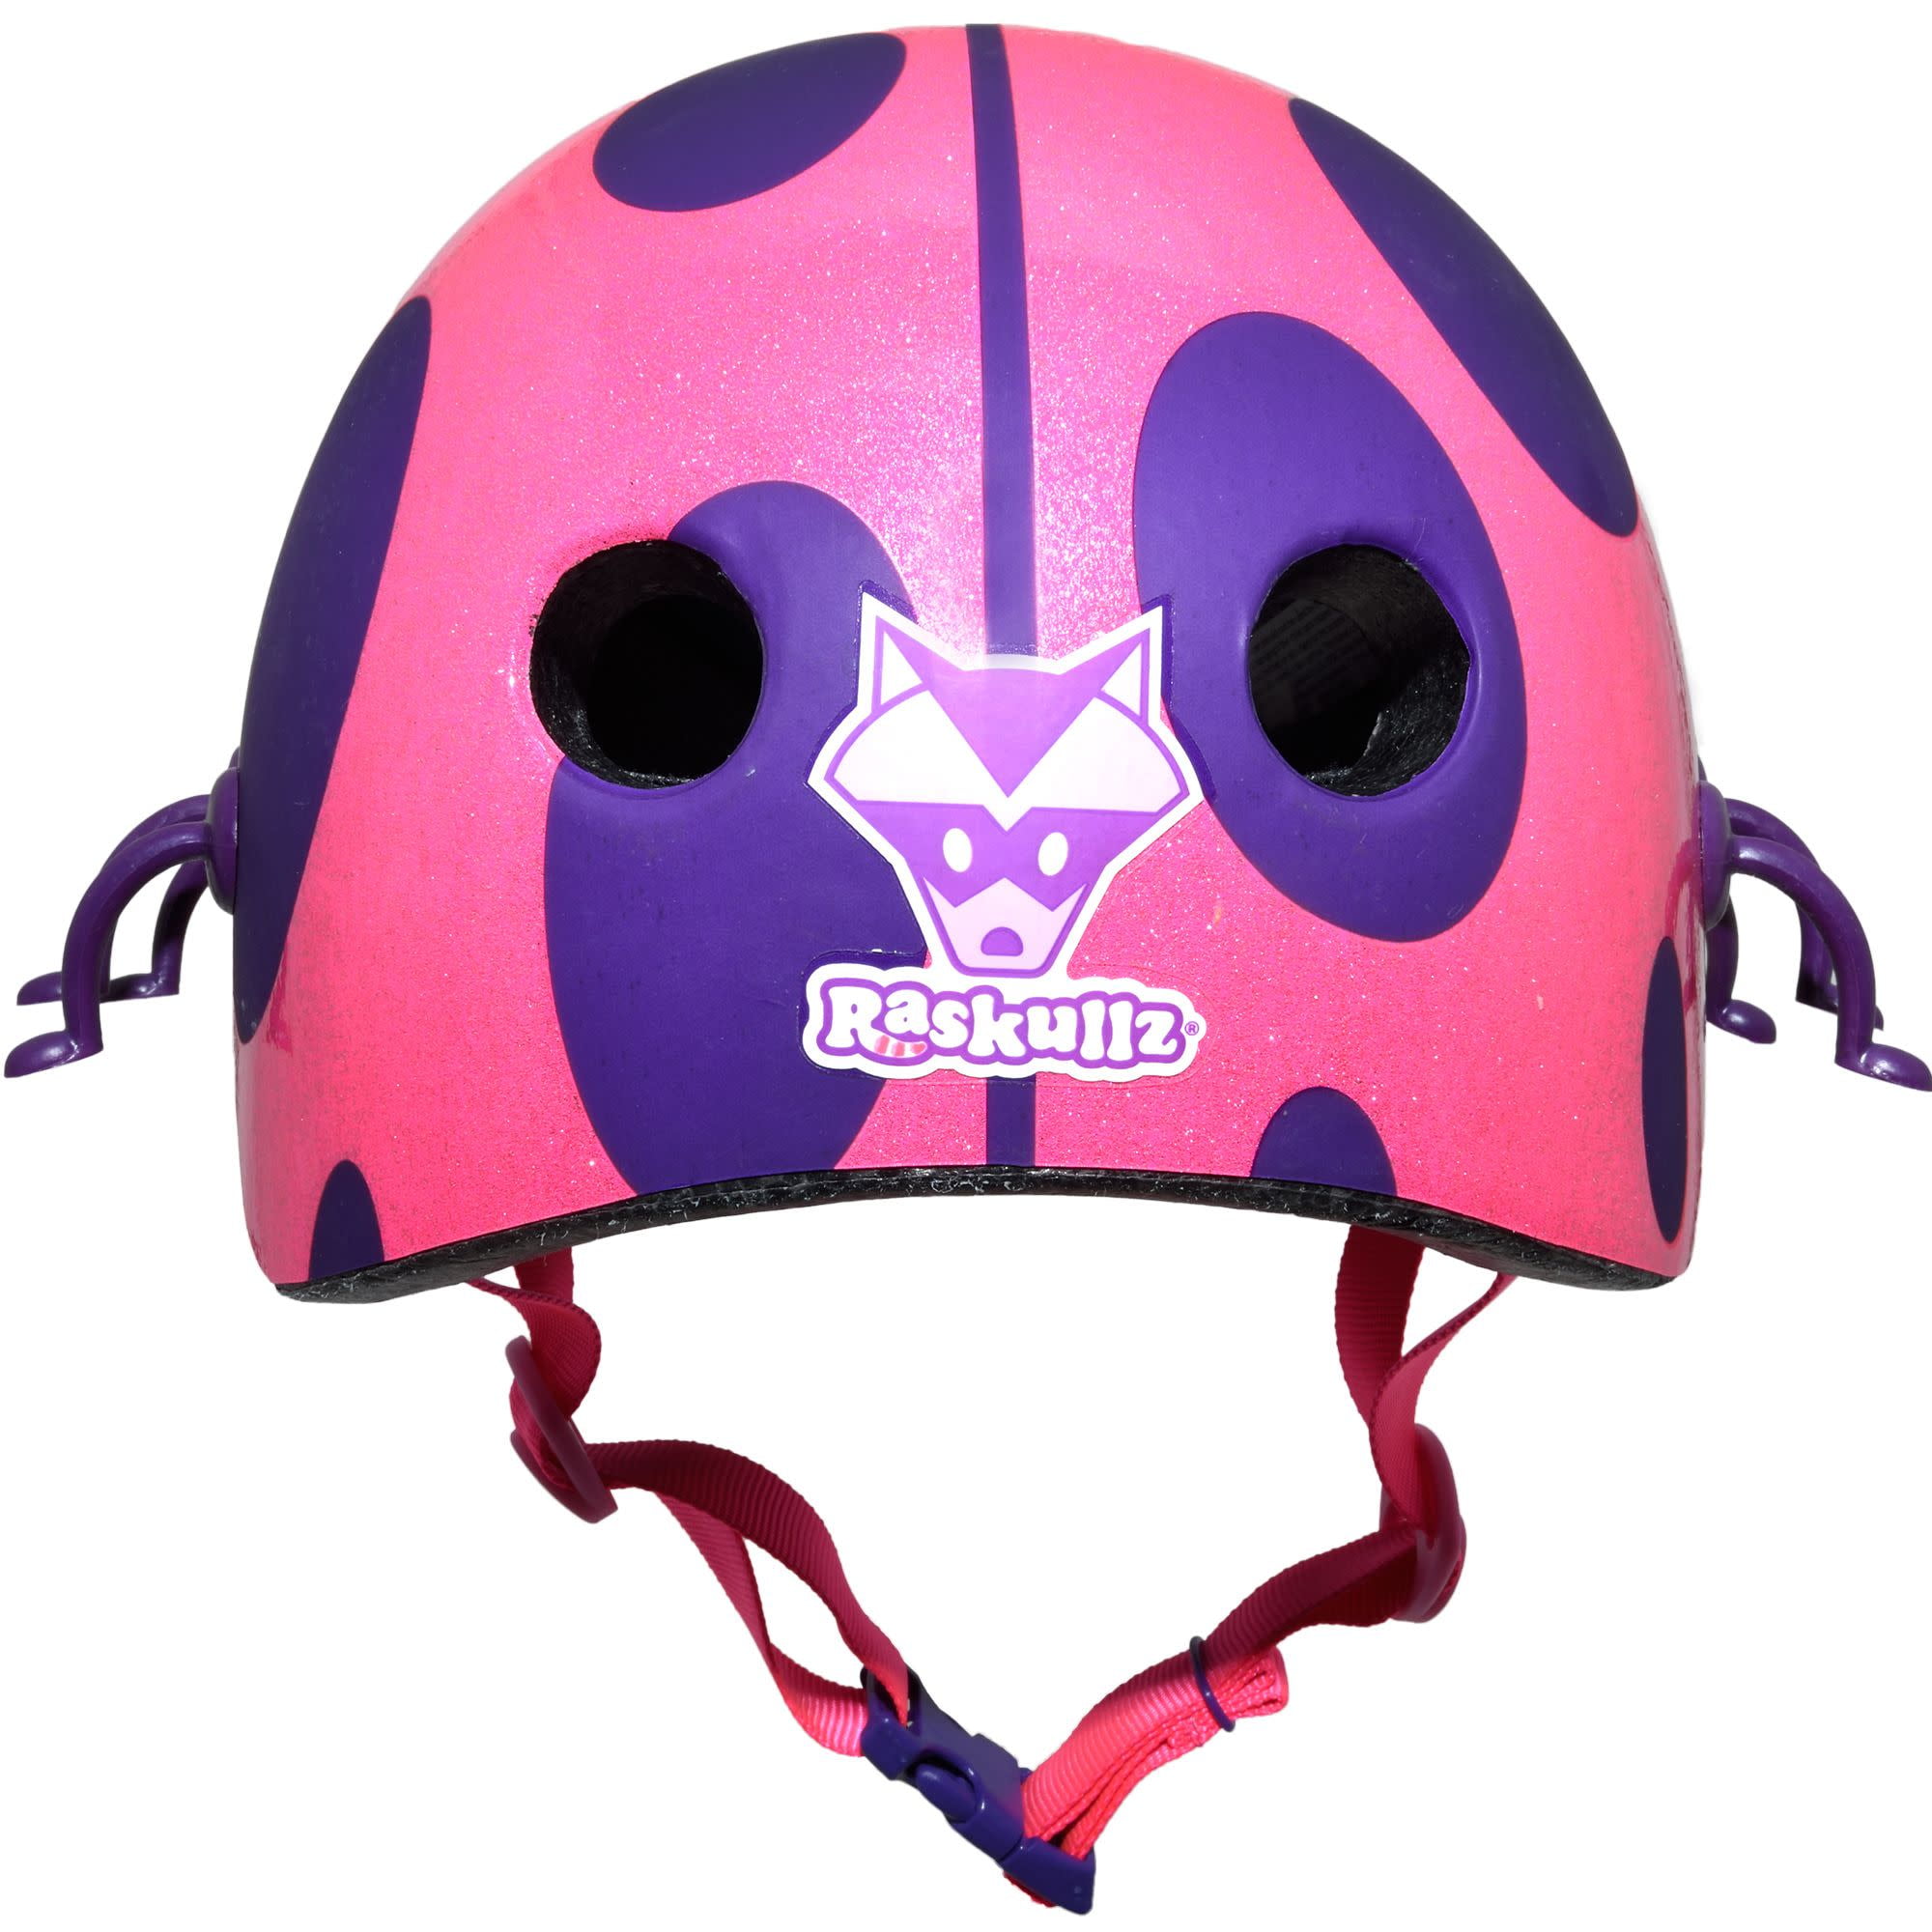 Wipeout Kids Helmet Model L V-333 Head Size 19.5 To 20.5 Inches